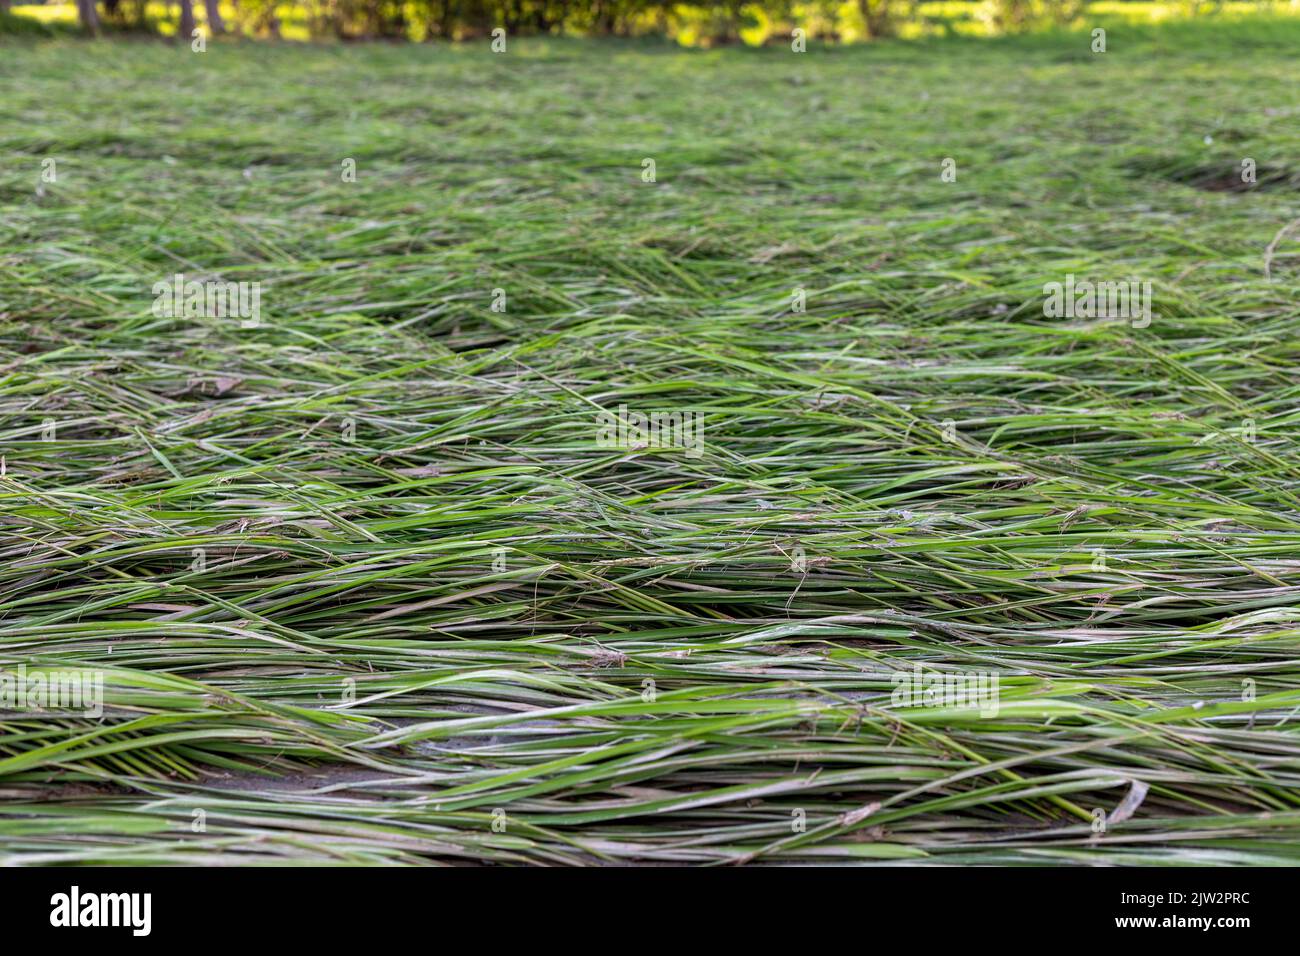 Flood water runoff and wash away agriculture field and crop Stock Photo